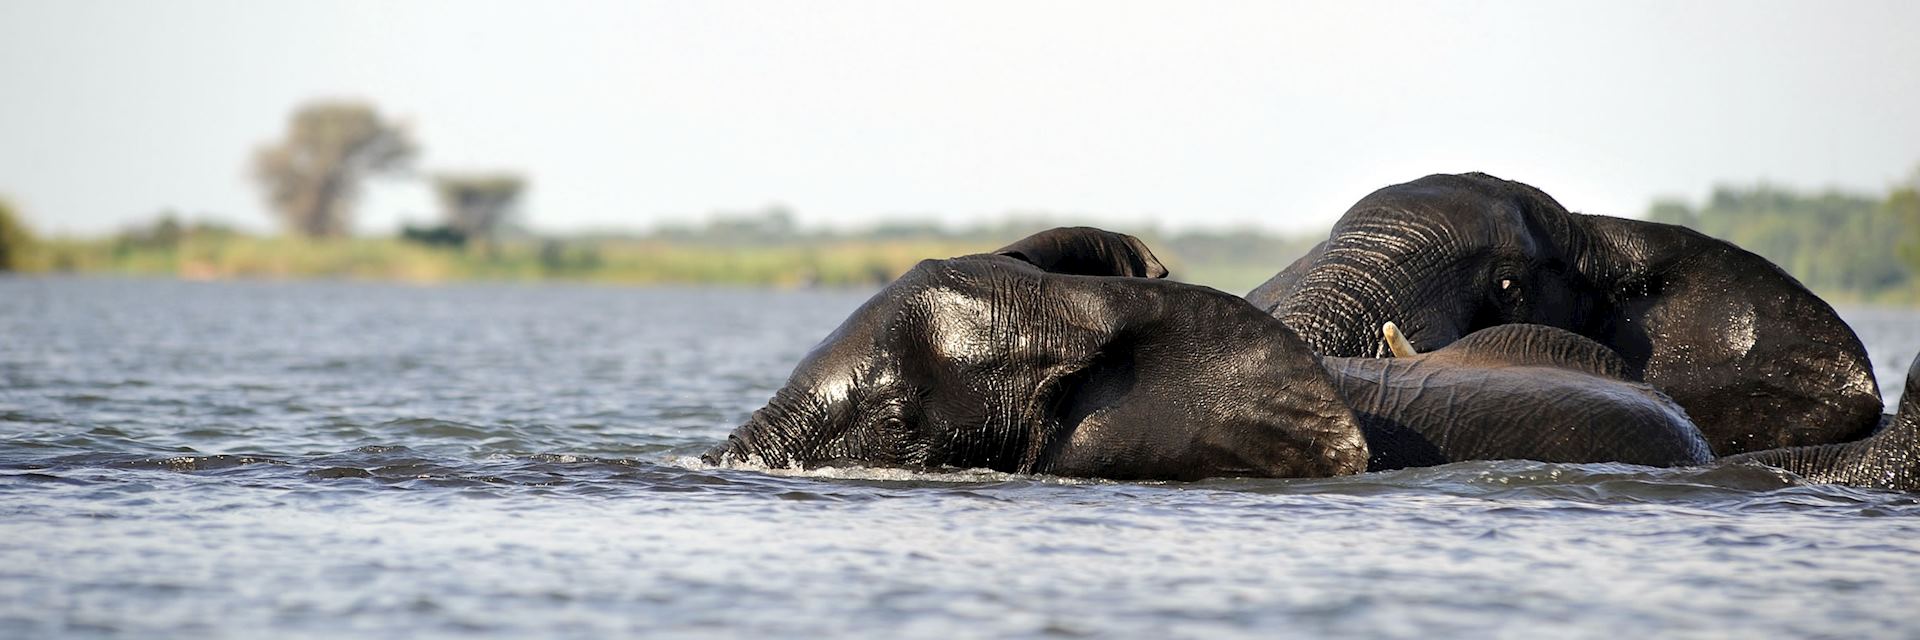 Elephant crossing a river in the Linyanti